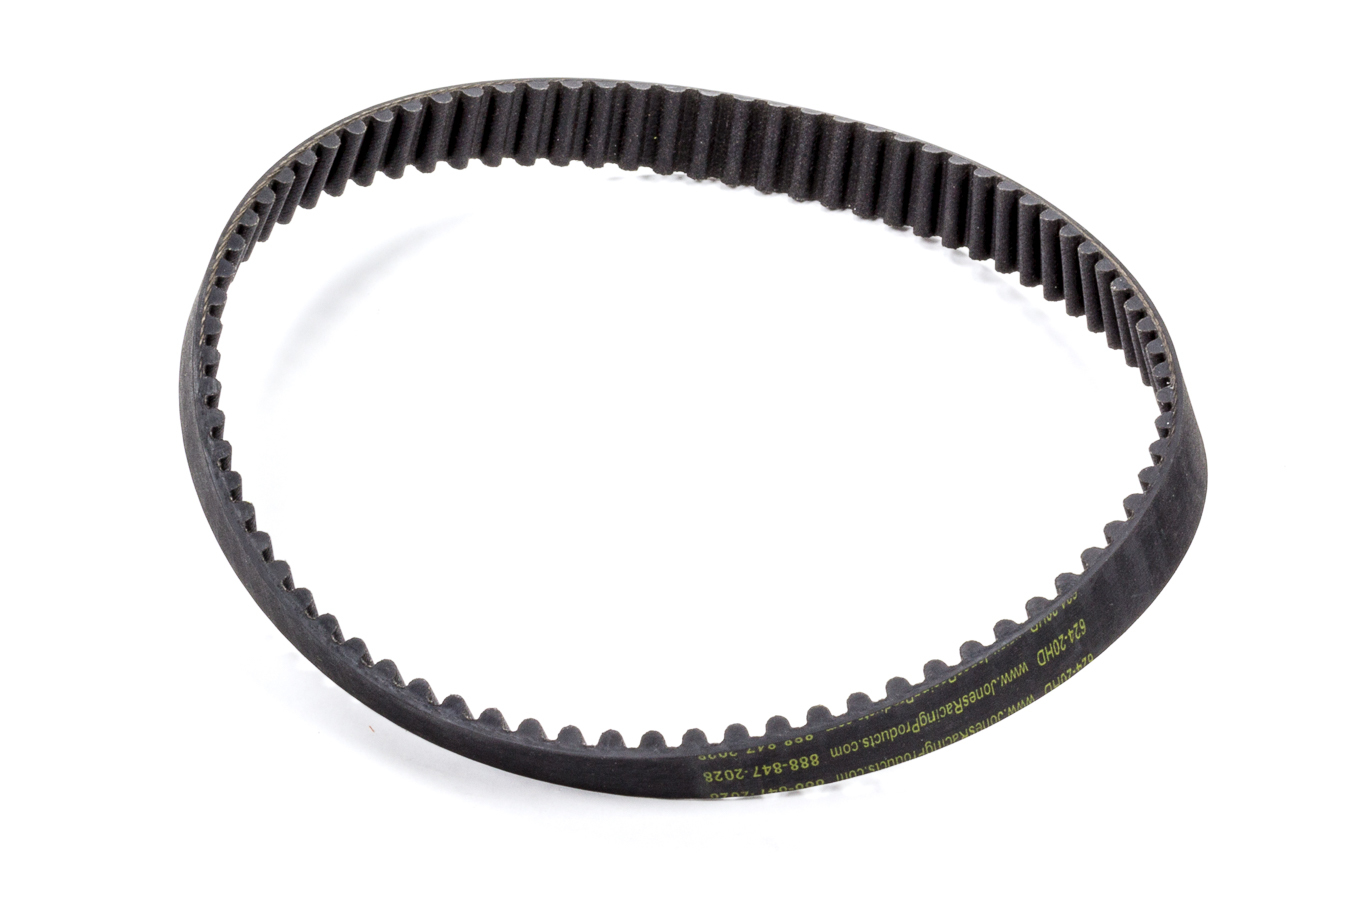 Jones Racing Products 624-20HD HTD Drive Belt, 24.570 in Long, 20 mm Wide, 8 mm Pitch, Each